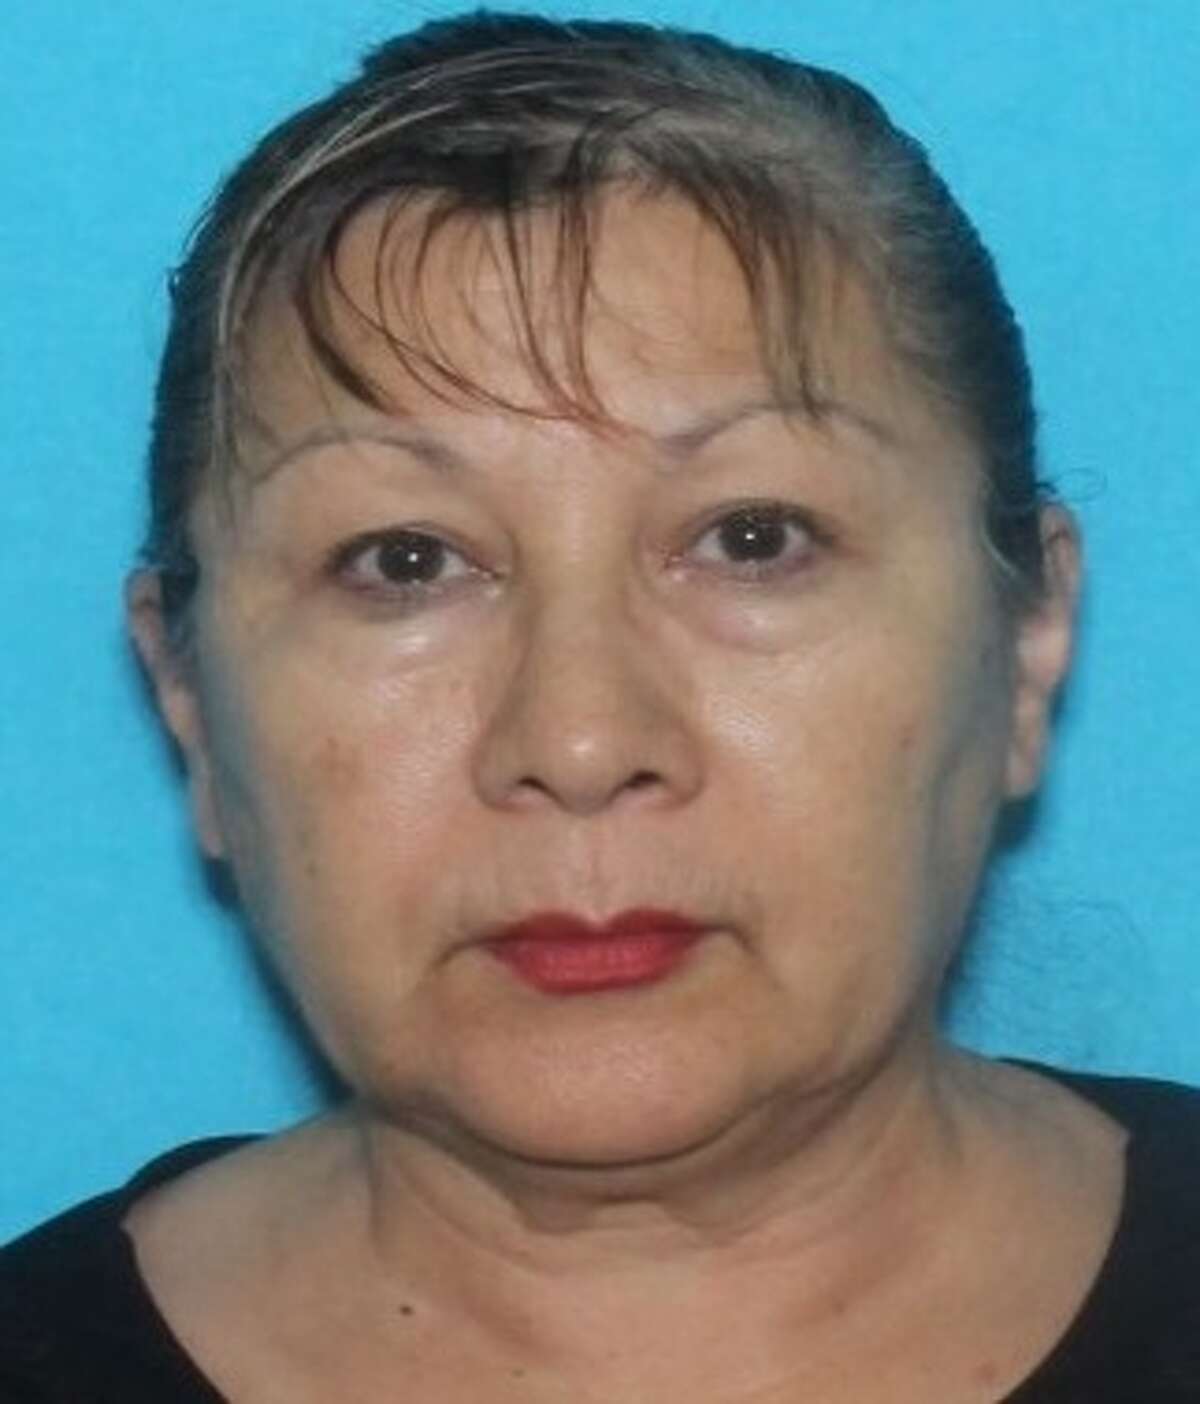 Yolanda Rodriguez Ramirez, 59, of Brownsville, was arrested Tuesday, Oct. 6. She is charged with engaging in organized criminal activity.